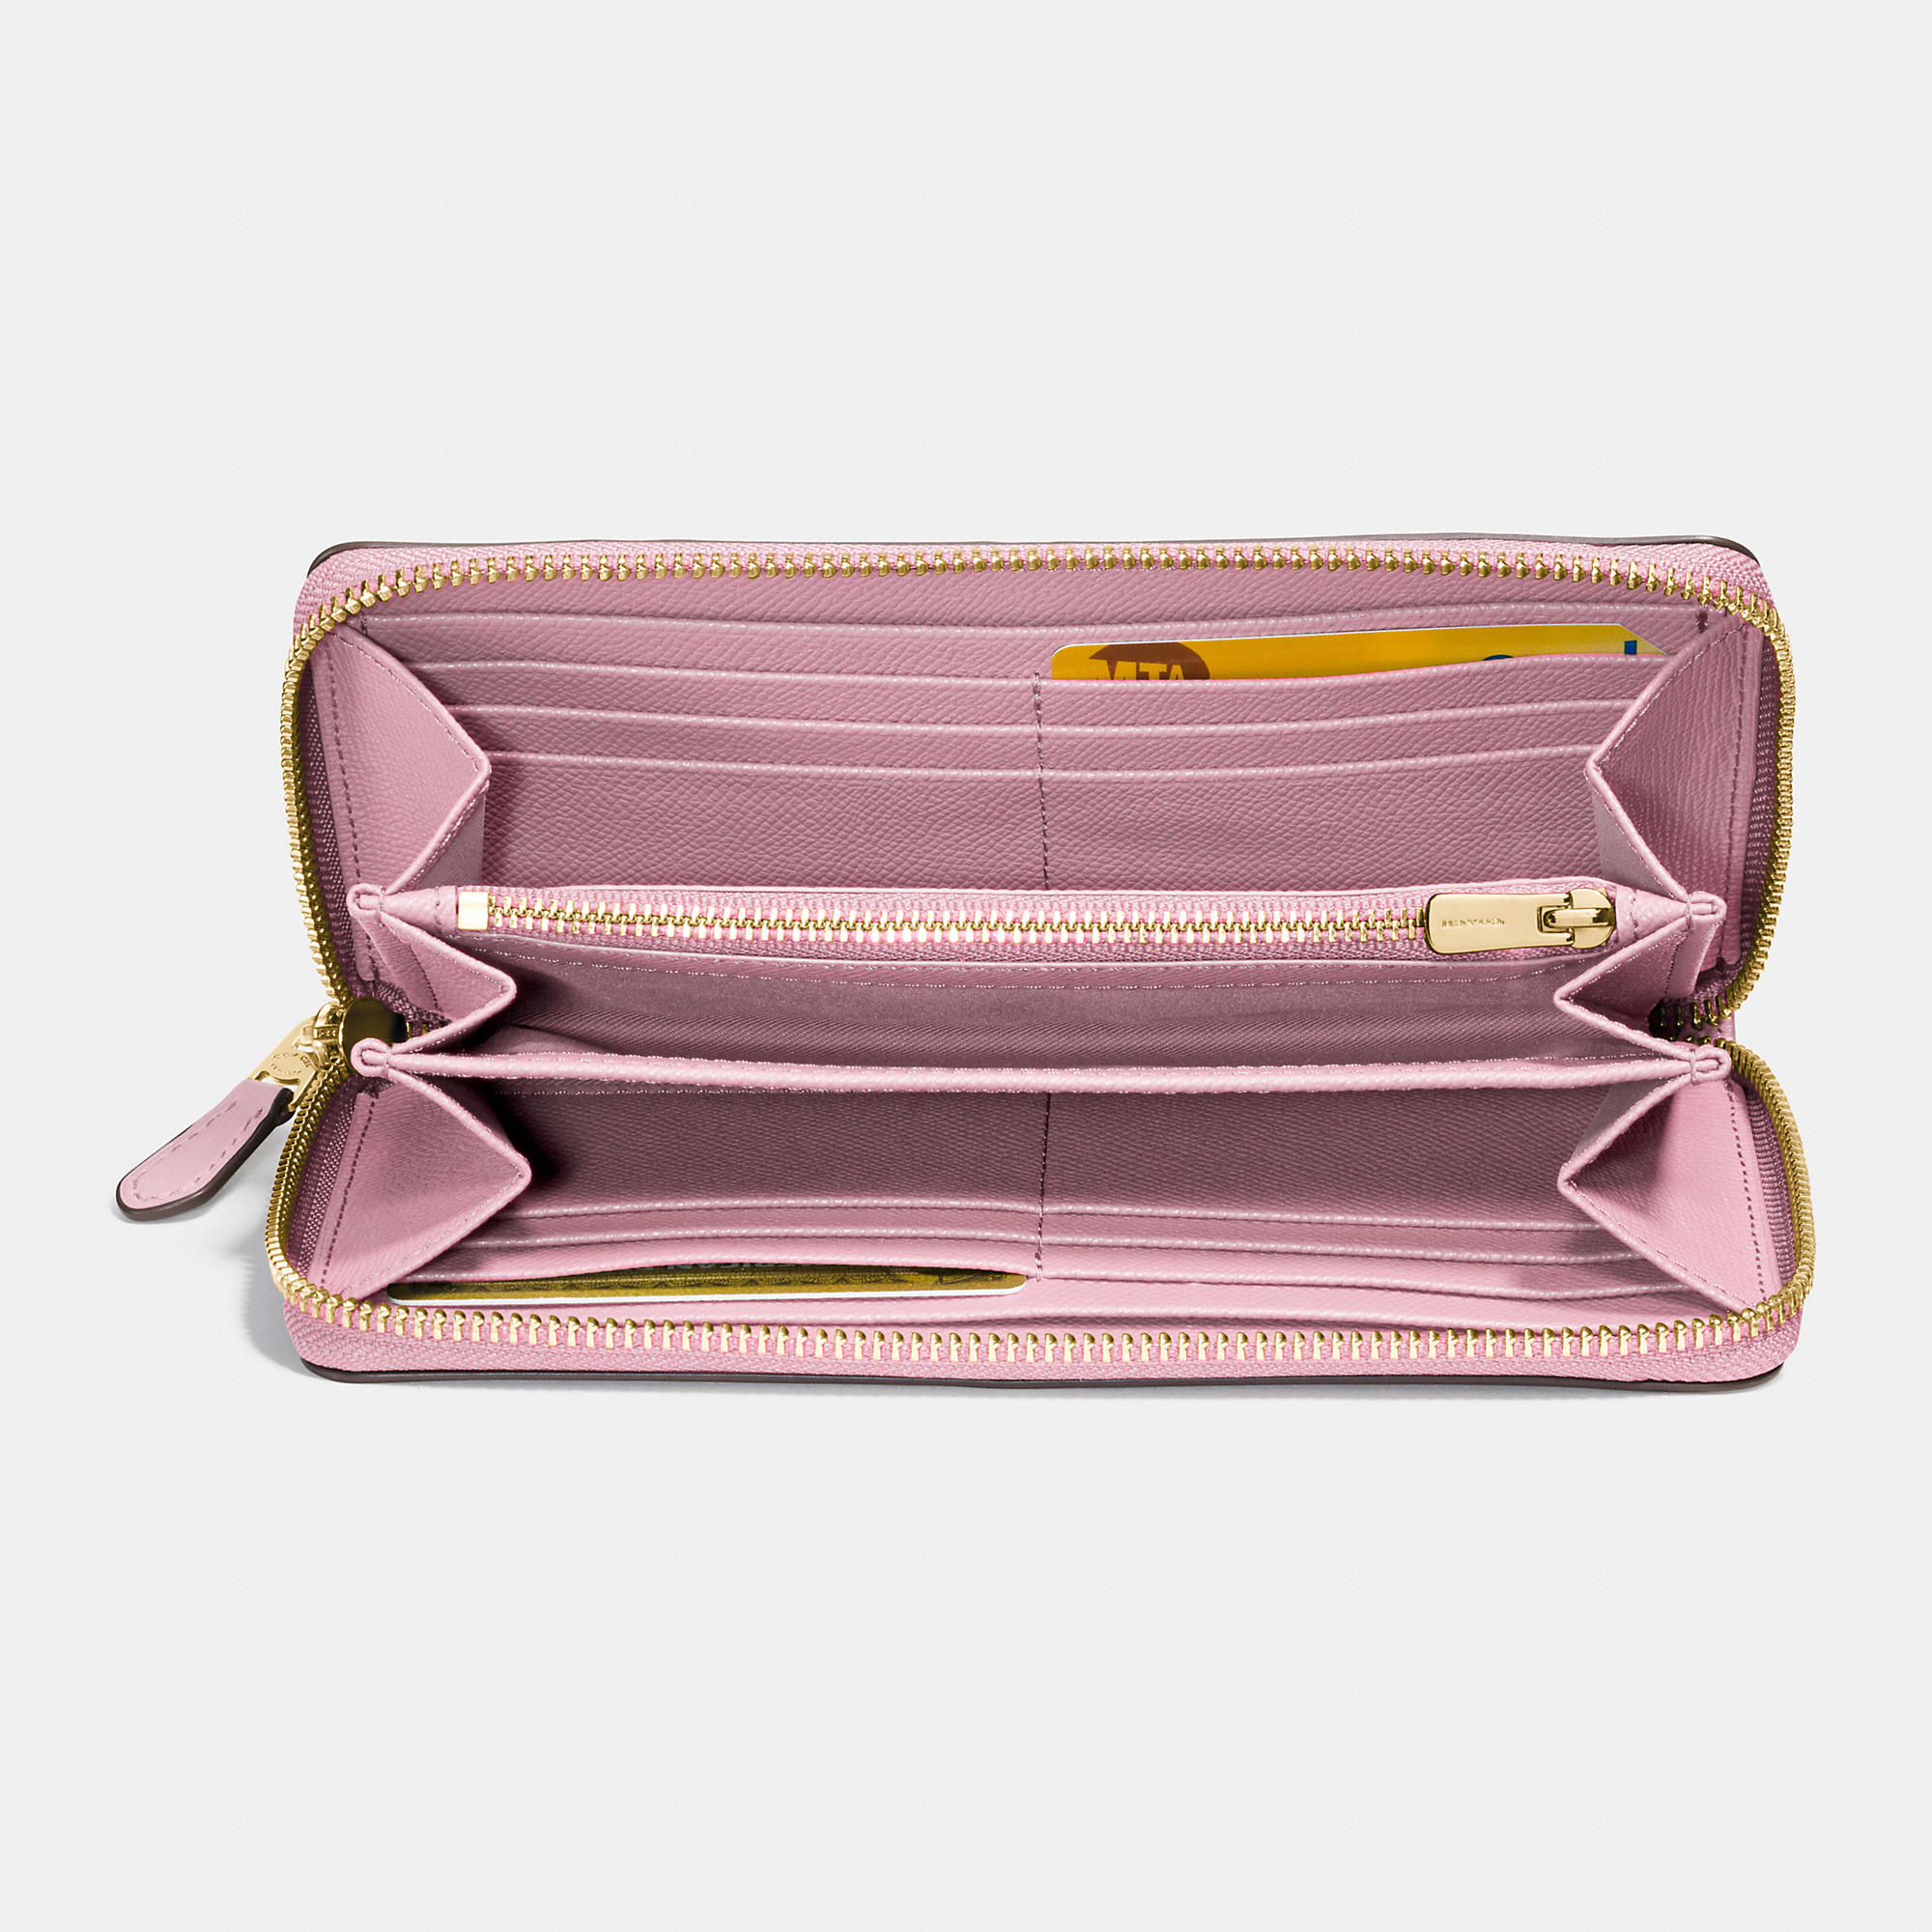 Lyst - Coach Accordion Zip Wallet In Signature Embossed Leather in Pink